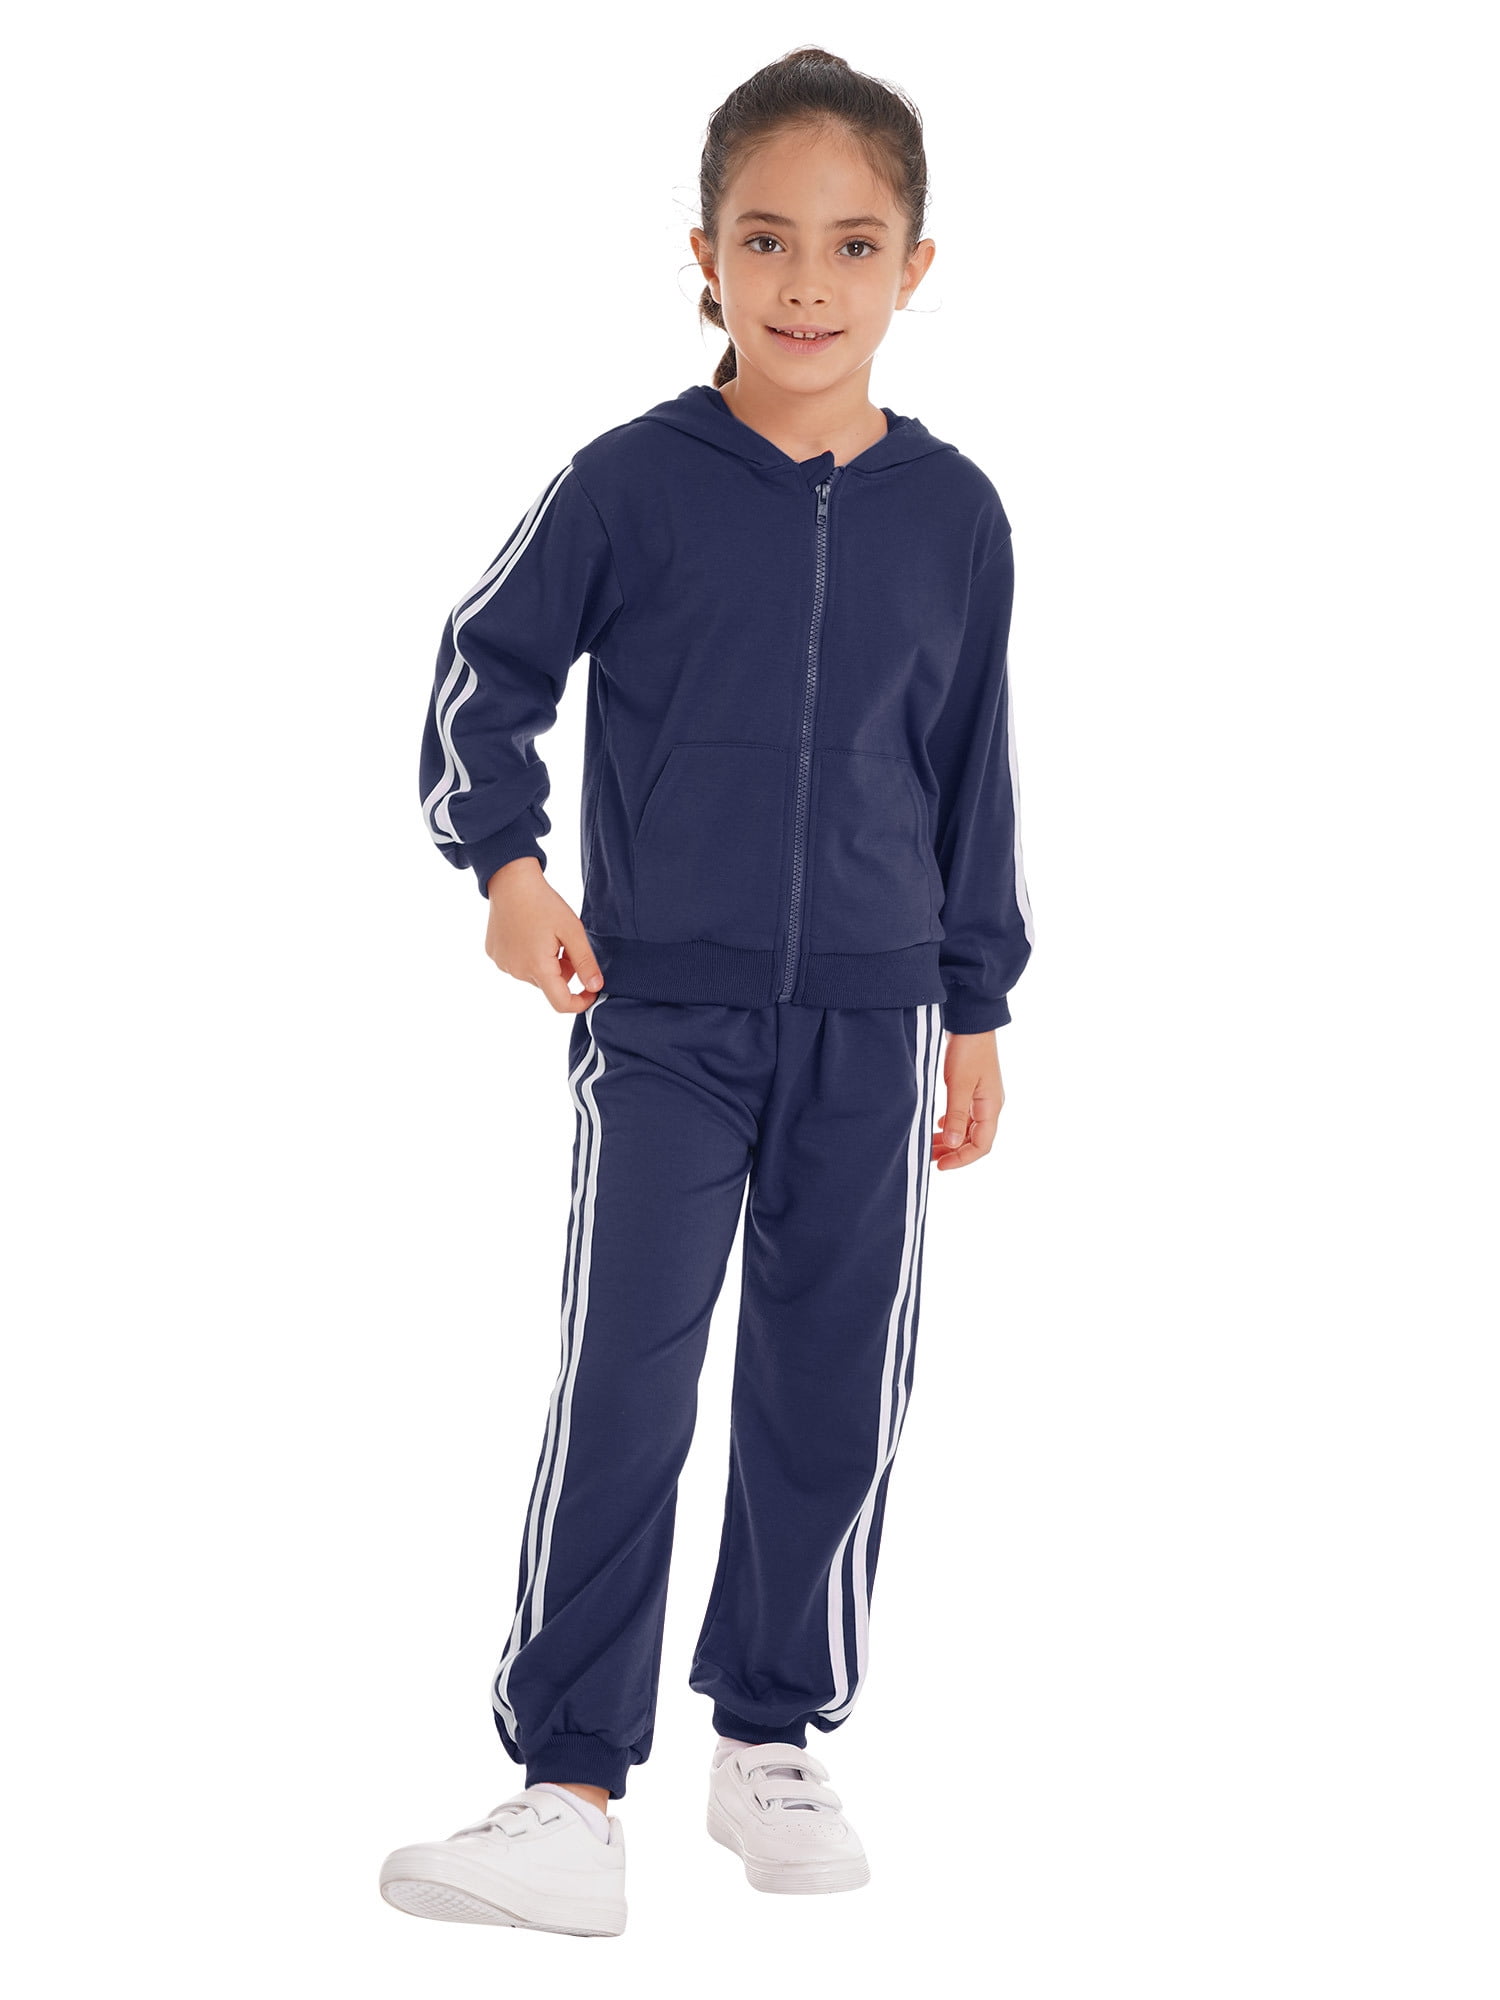 LittleSpring Toddler Boys Hoodie Sweatsuit and Pants Set 2 Pieces